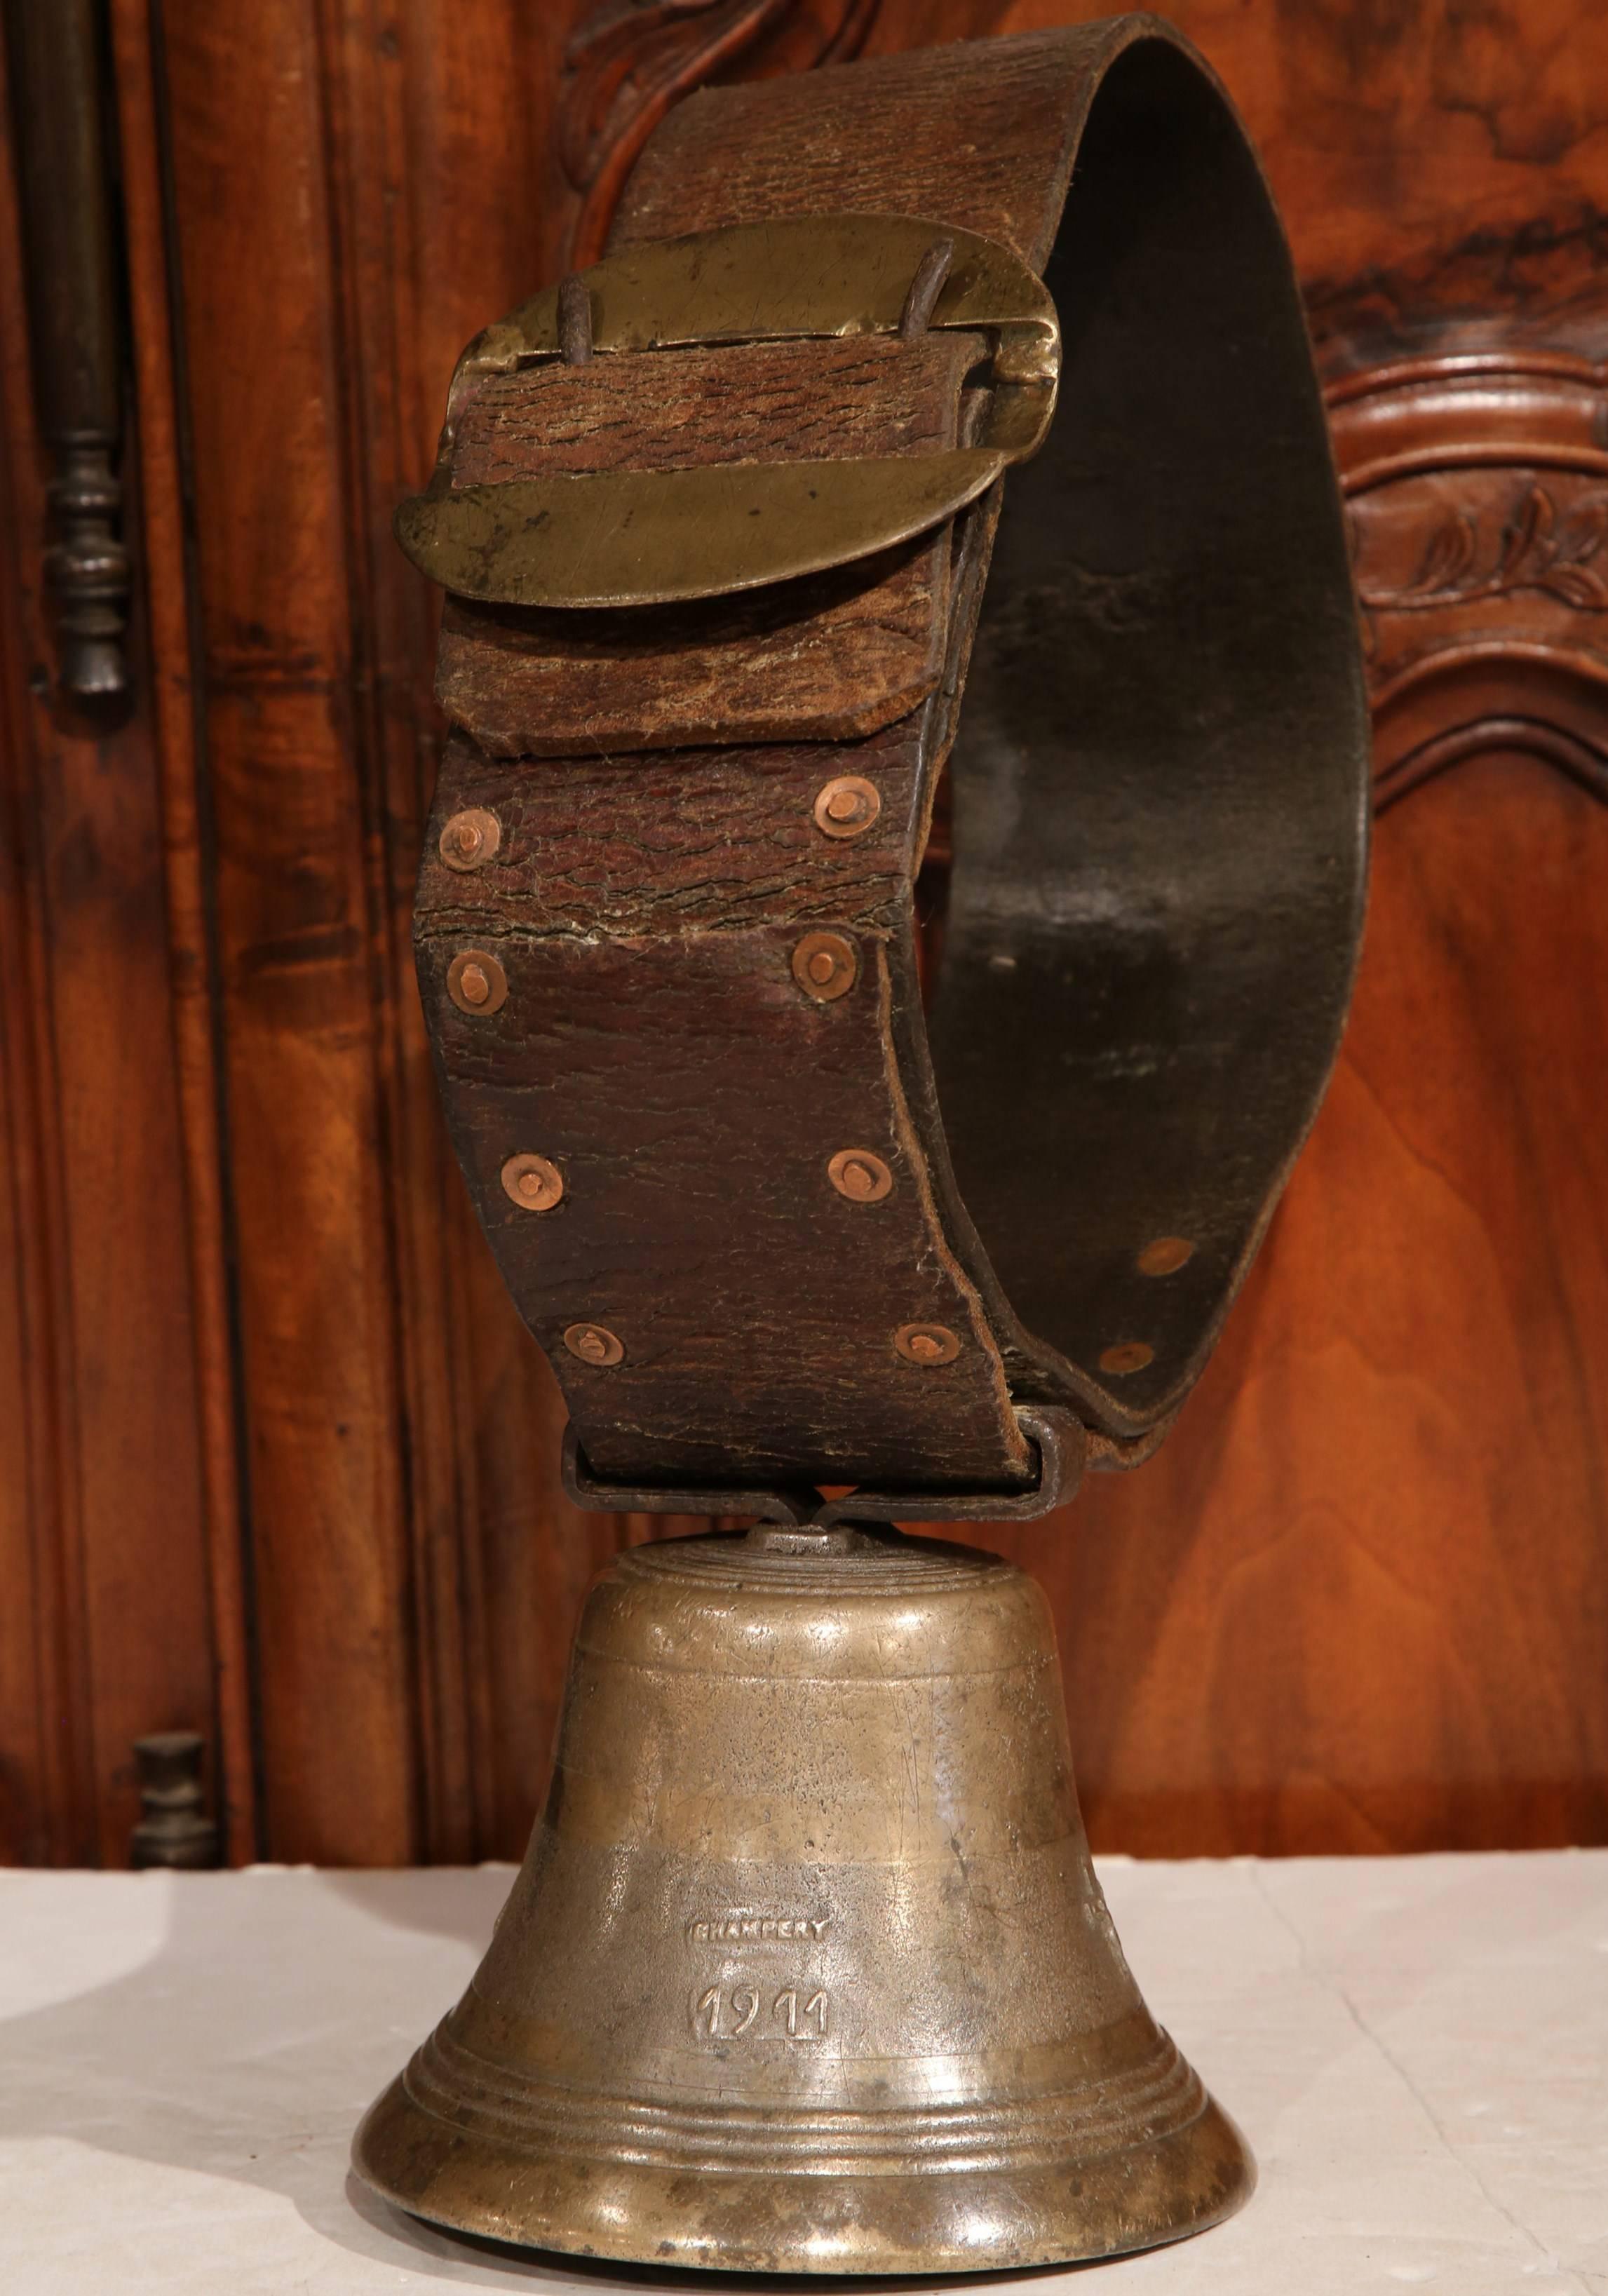 This antique bronze bell was crafted in the village of Champery, Switzerland in 1911. The bell features its original leather collar, and includes a variety of motifs from Christ on a cross to a cow with the date and foundry place. These kinds of